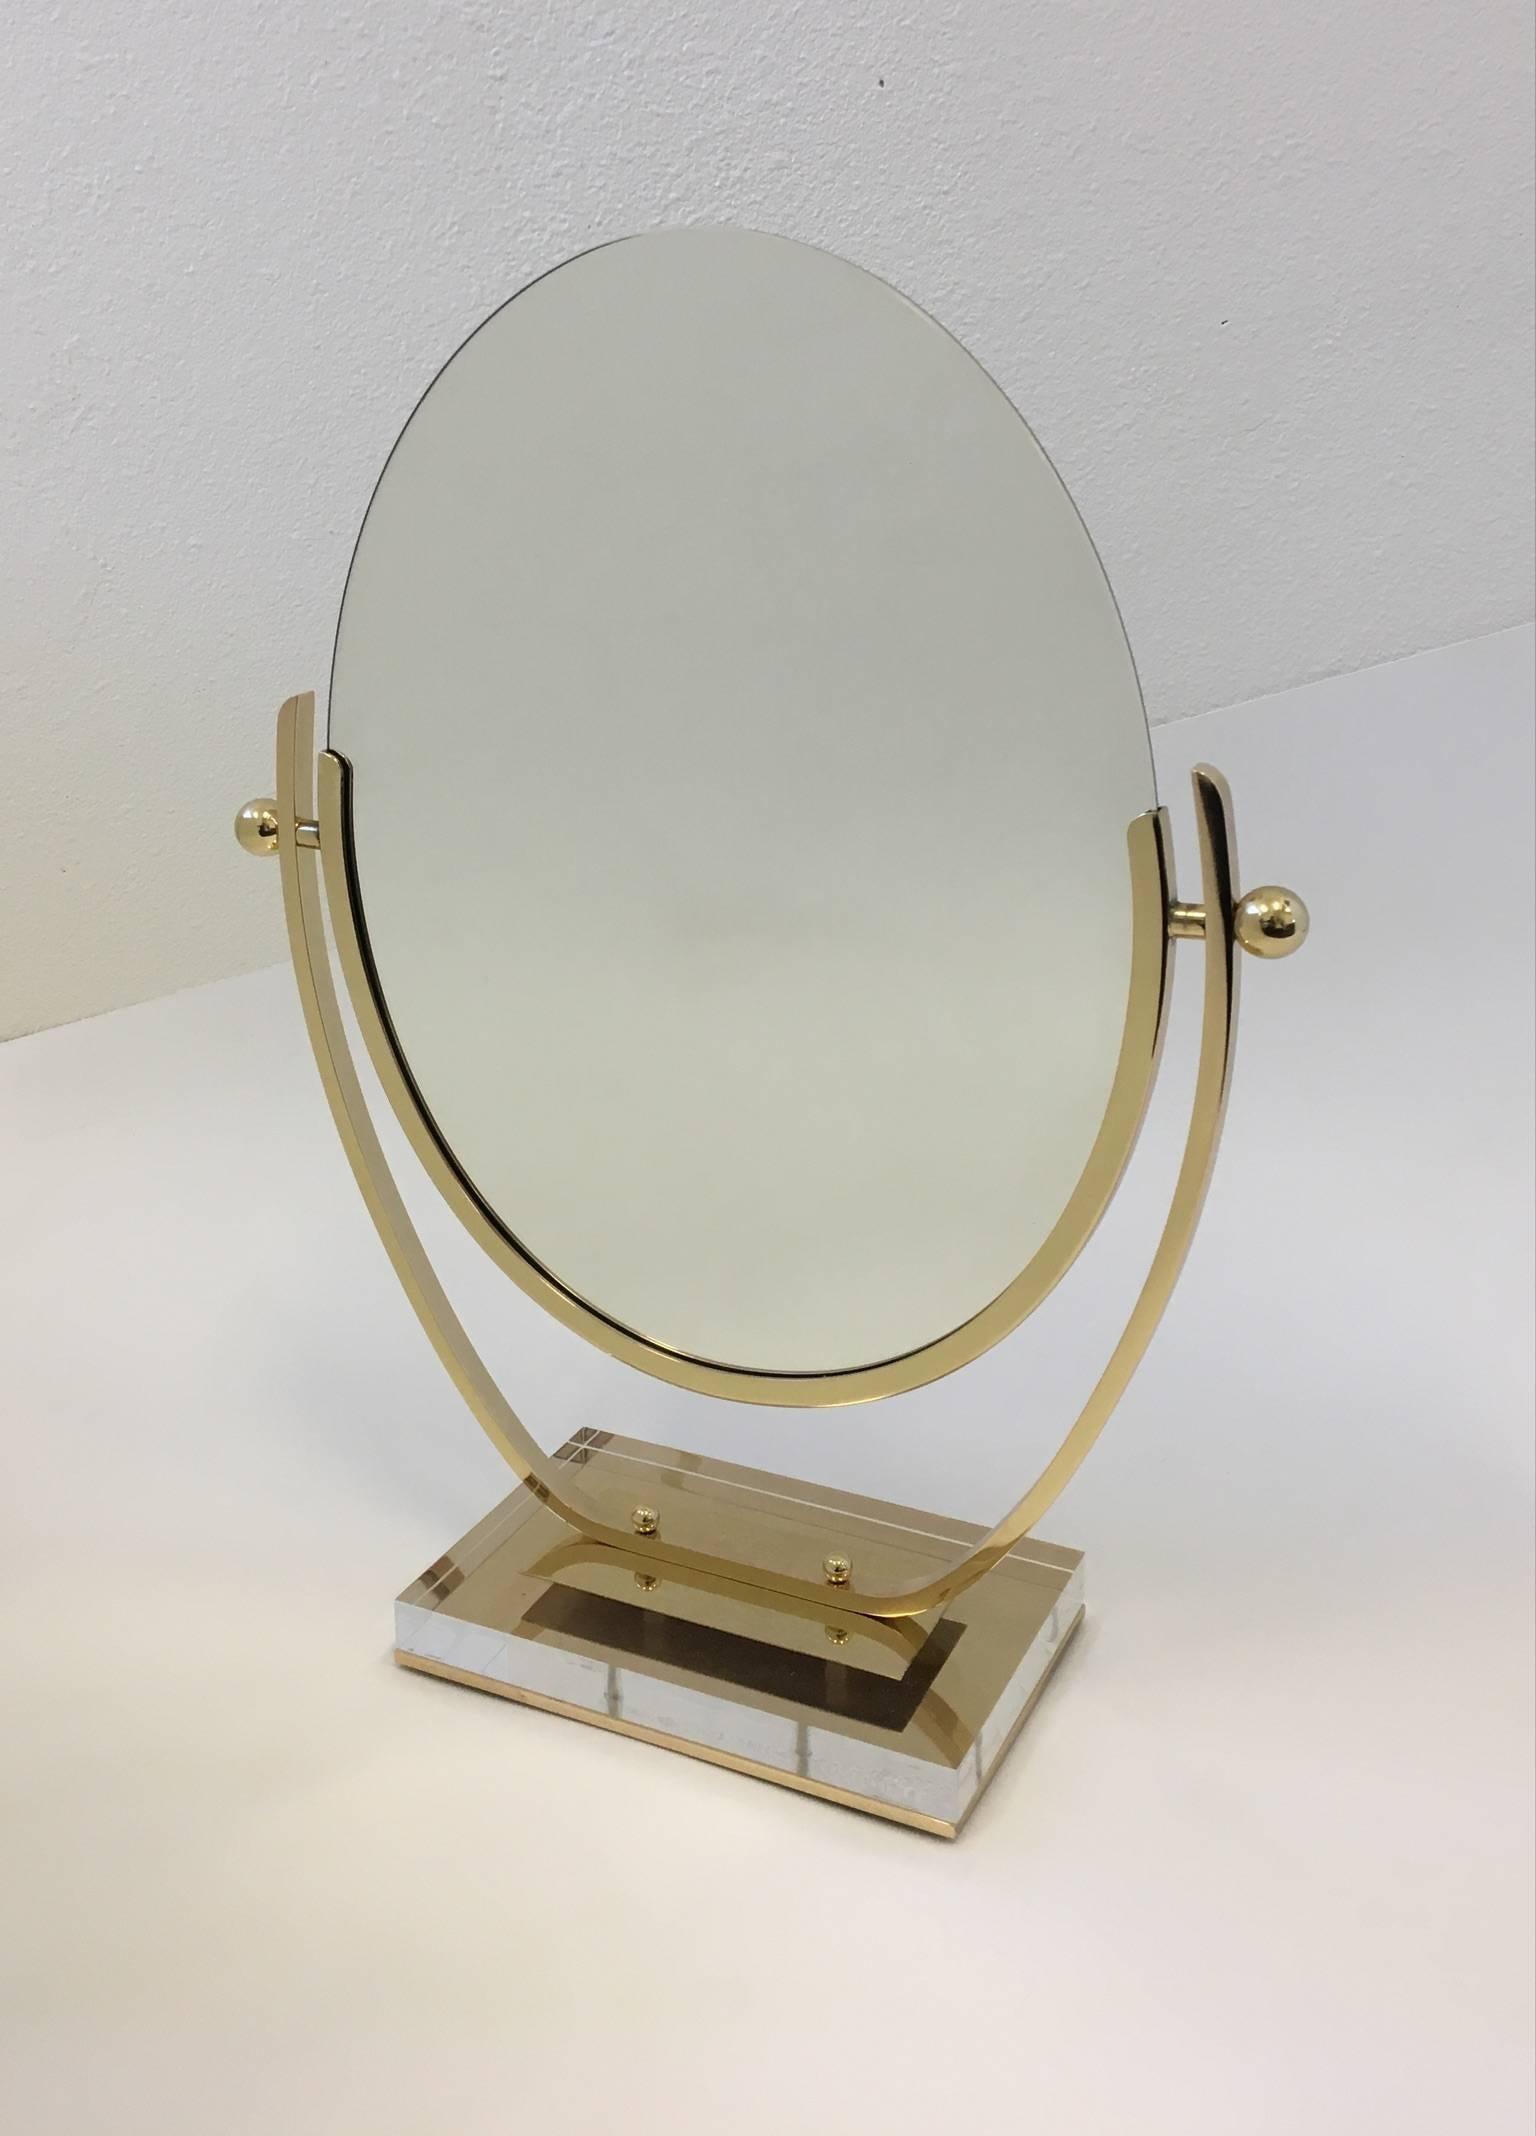 An early 1960s polished brass and acrylic vanity mirror by Charles Hollis Jones.
The back of the mirror is covered with soft olive green cowhide. 
Dimension: 18